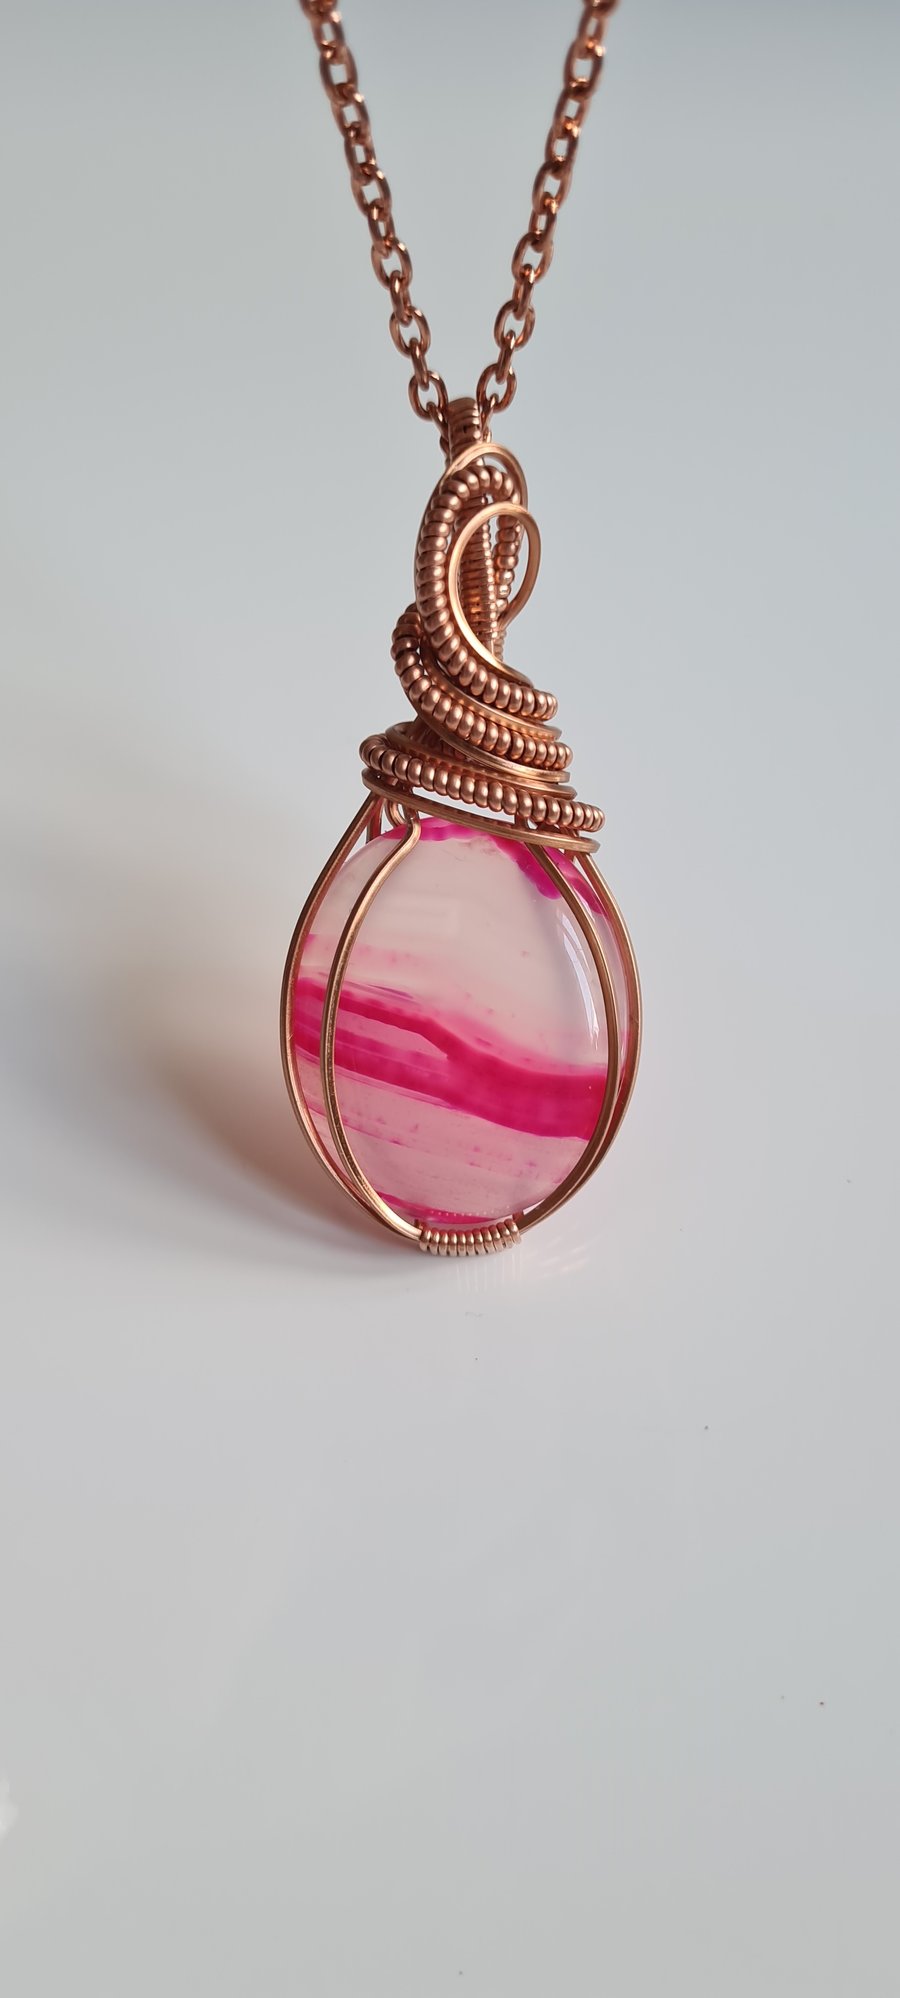 Large Natural Pink Botswana Agate & Copper Statement Pendant Necklace